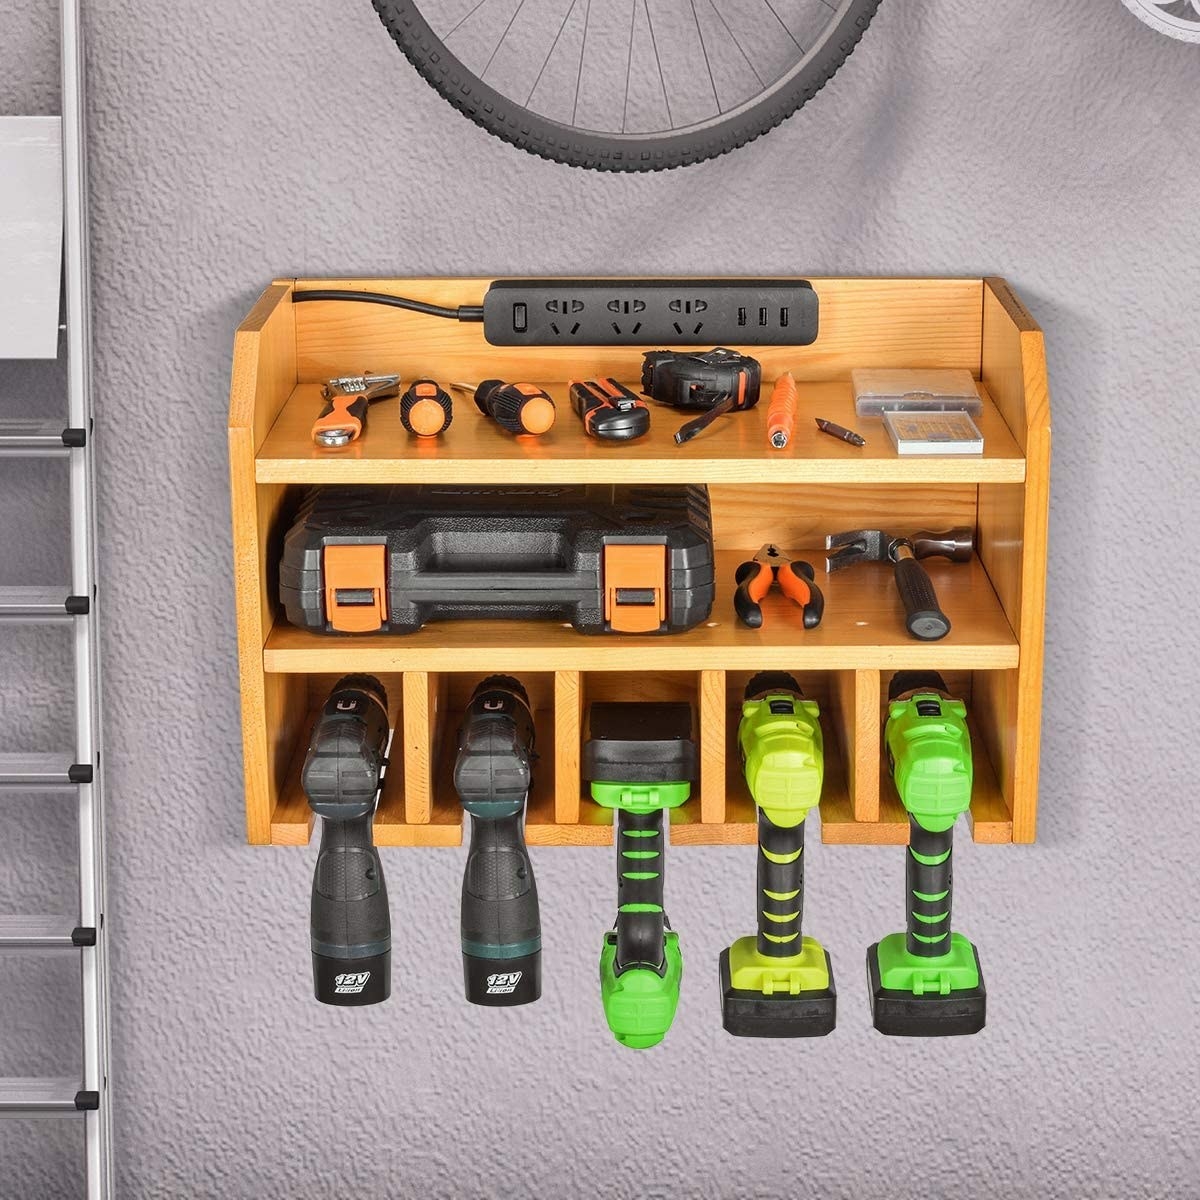 Several tools in the organizer